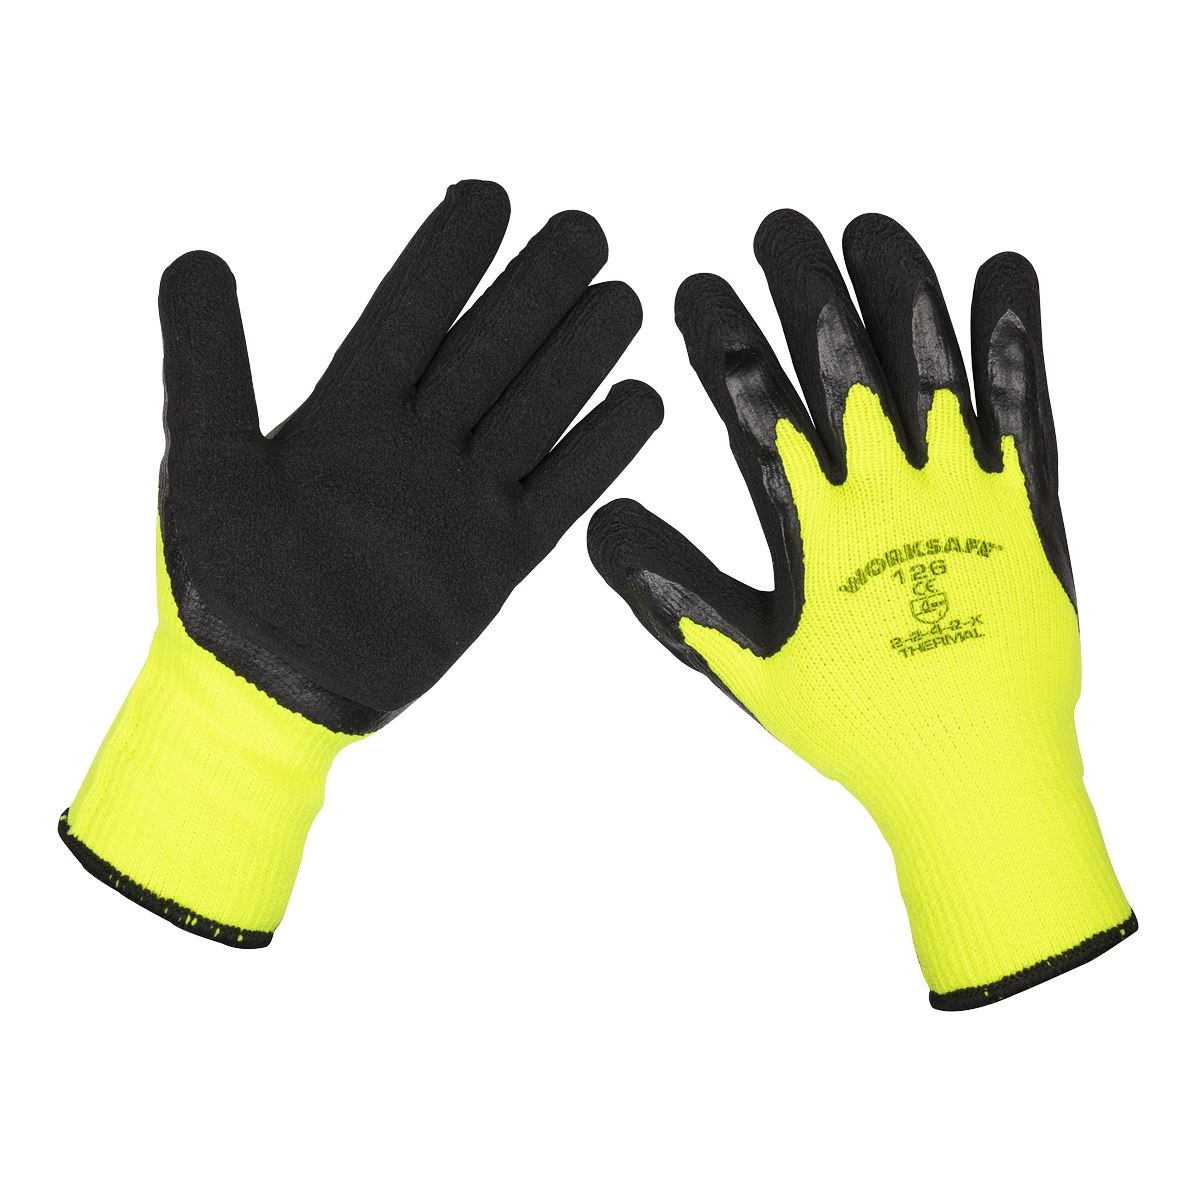 Worksafe by Sealey Thermal Super Grip Gloves (Large) - Pack of 6 Pairs